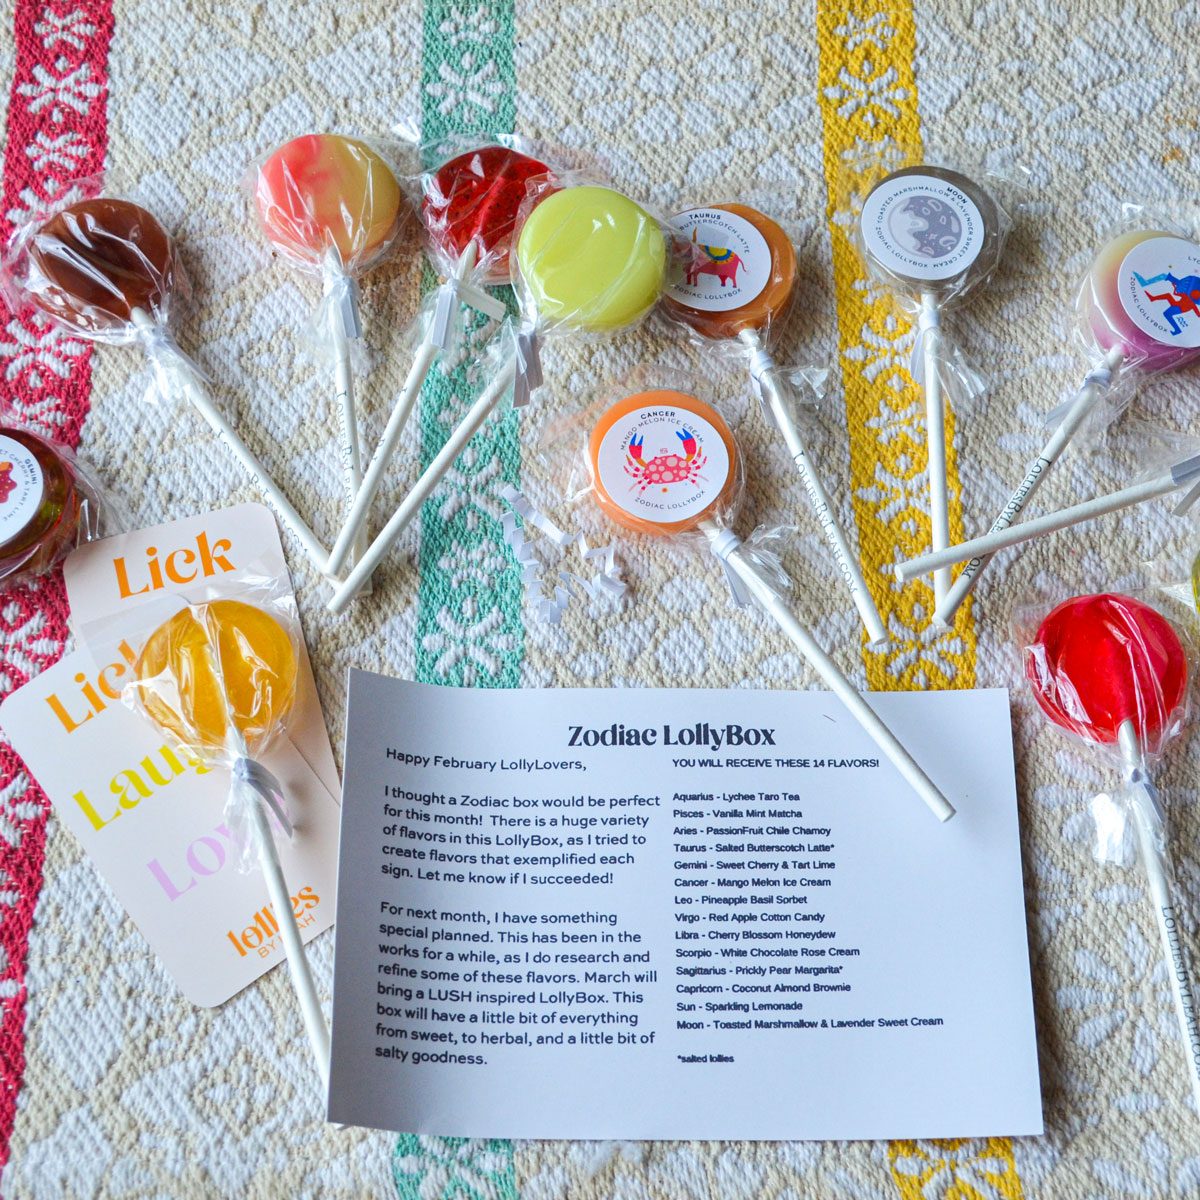 The Lollybox lollypops place on a table